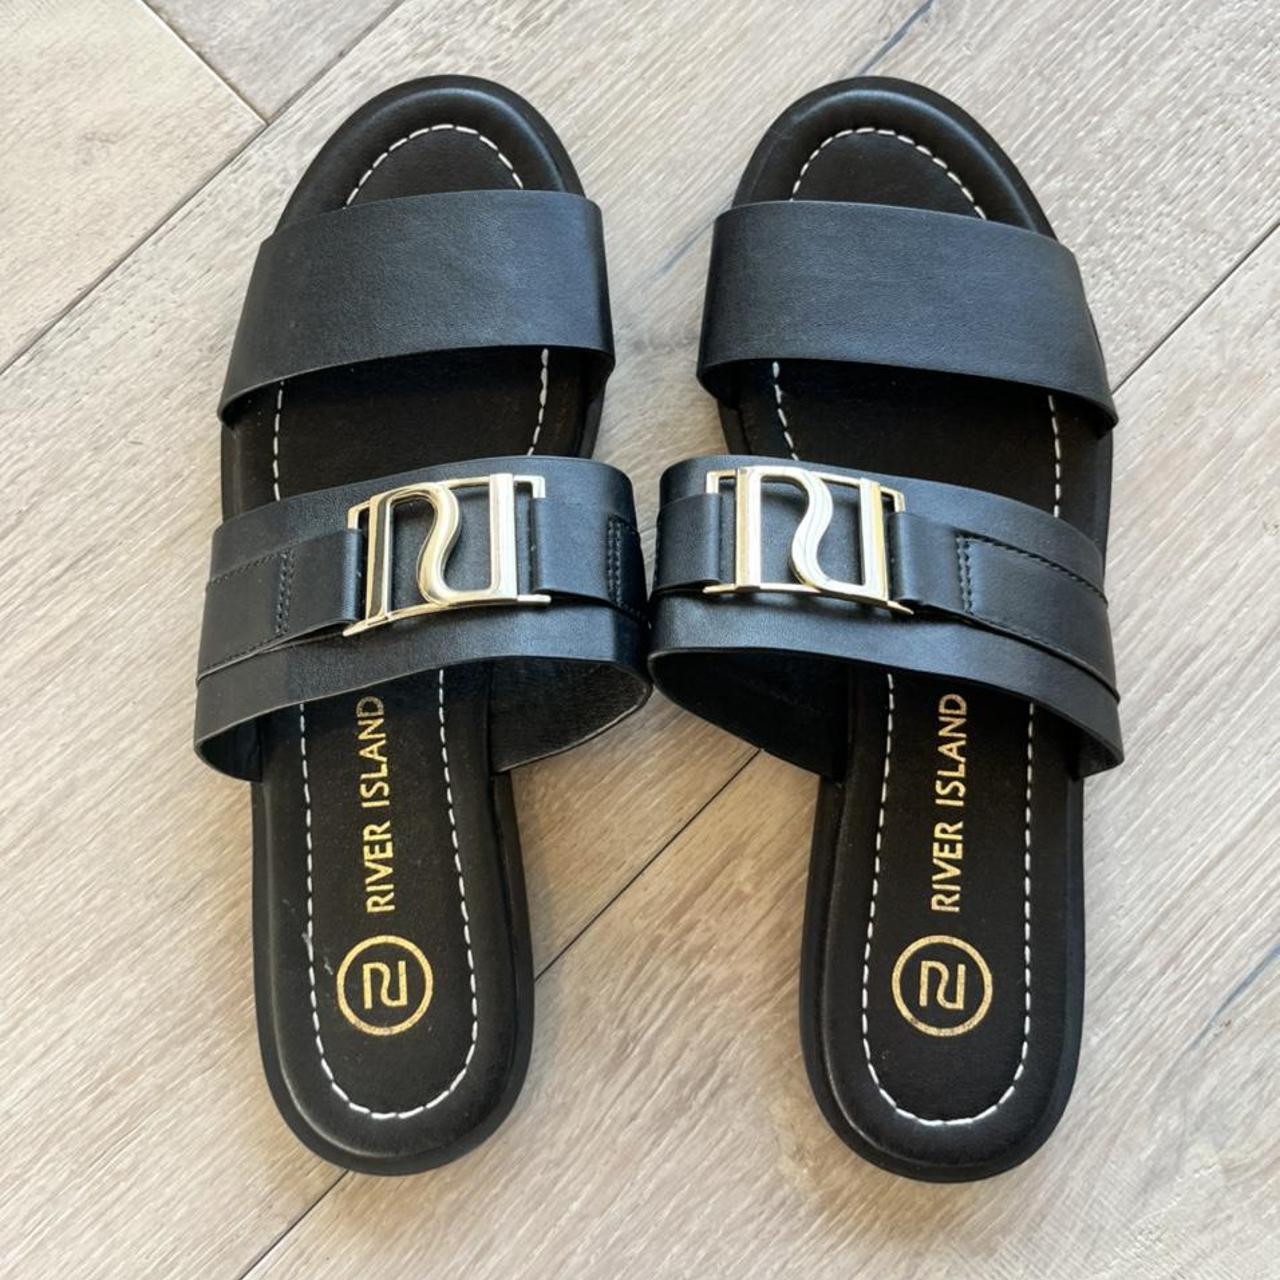 River Island Women's Black and Gold Sandals (2)